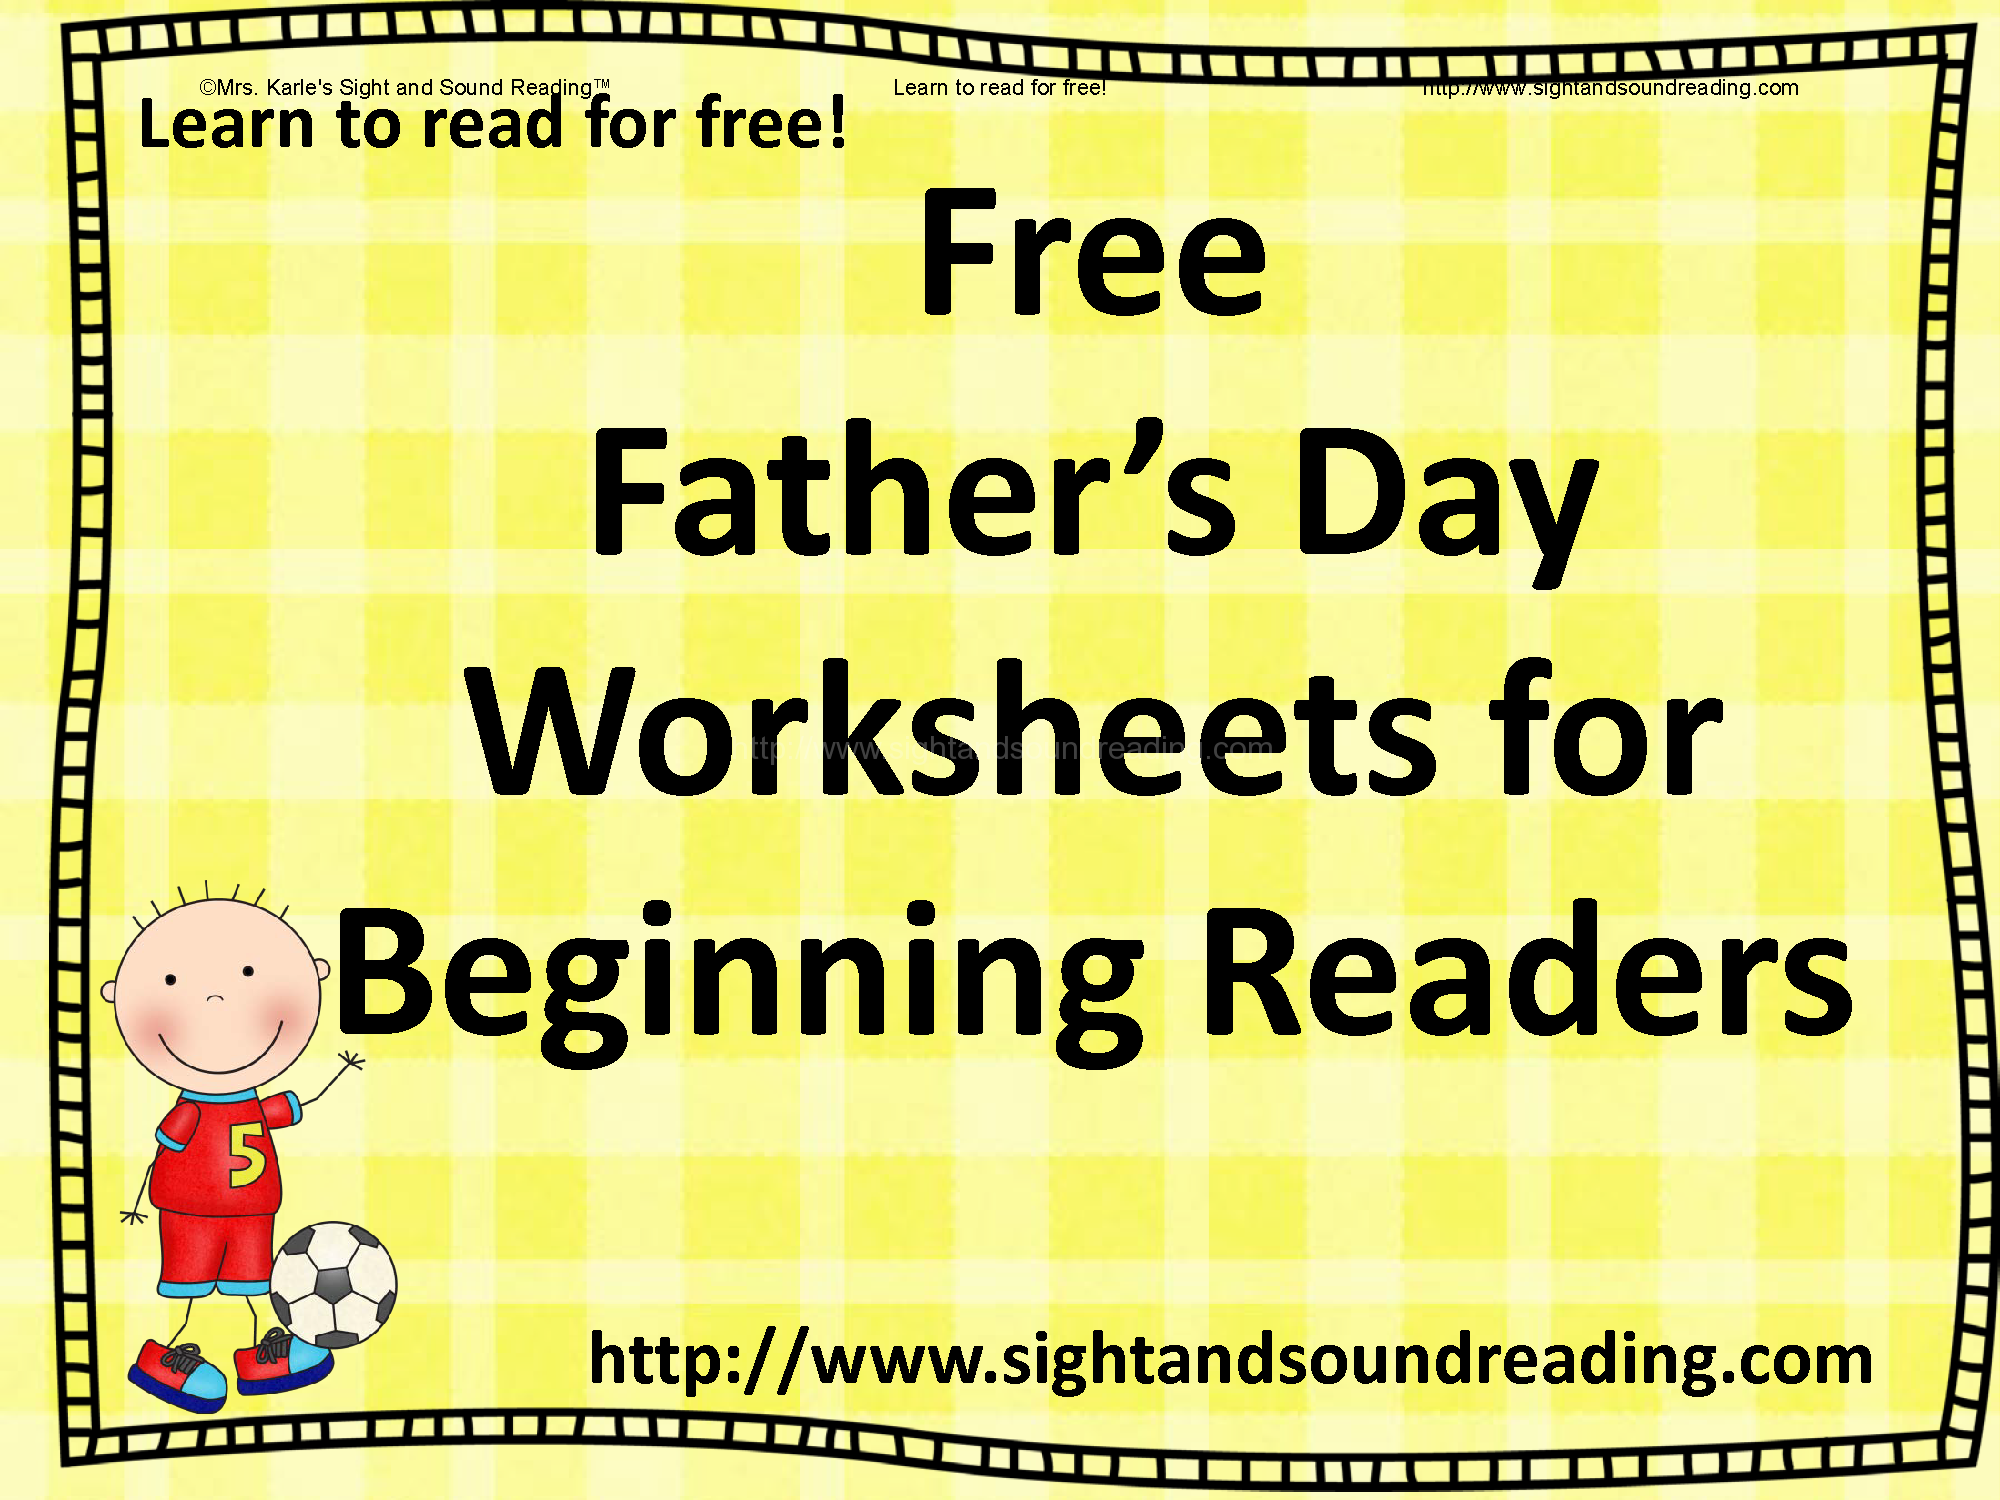 free-father-s-day-worksheets-for-kindergarten-or-preschool